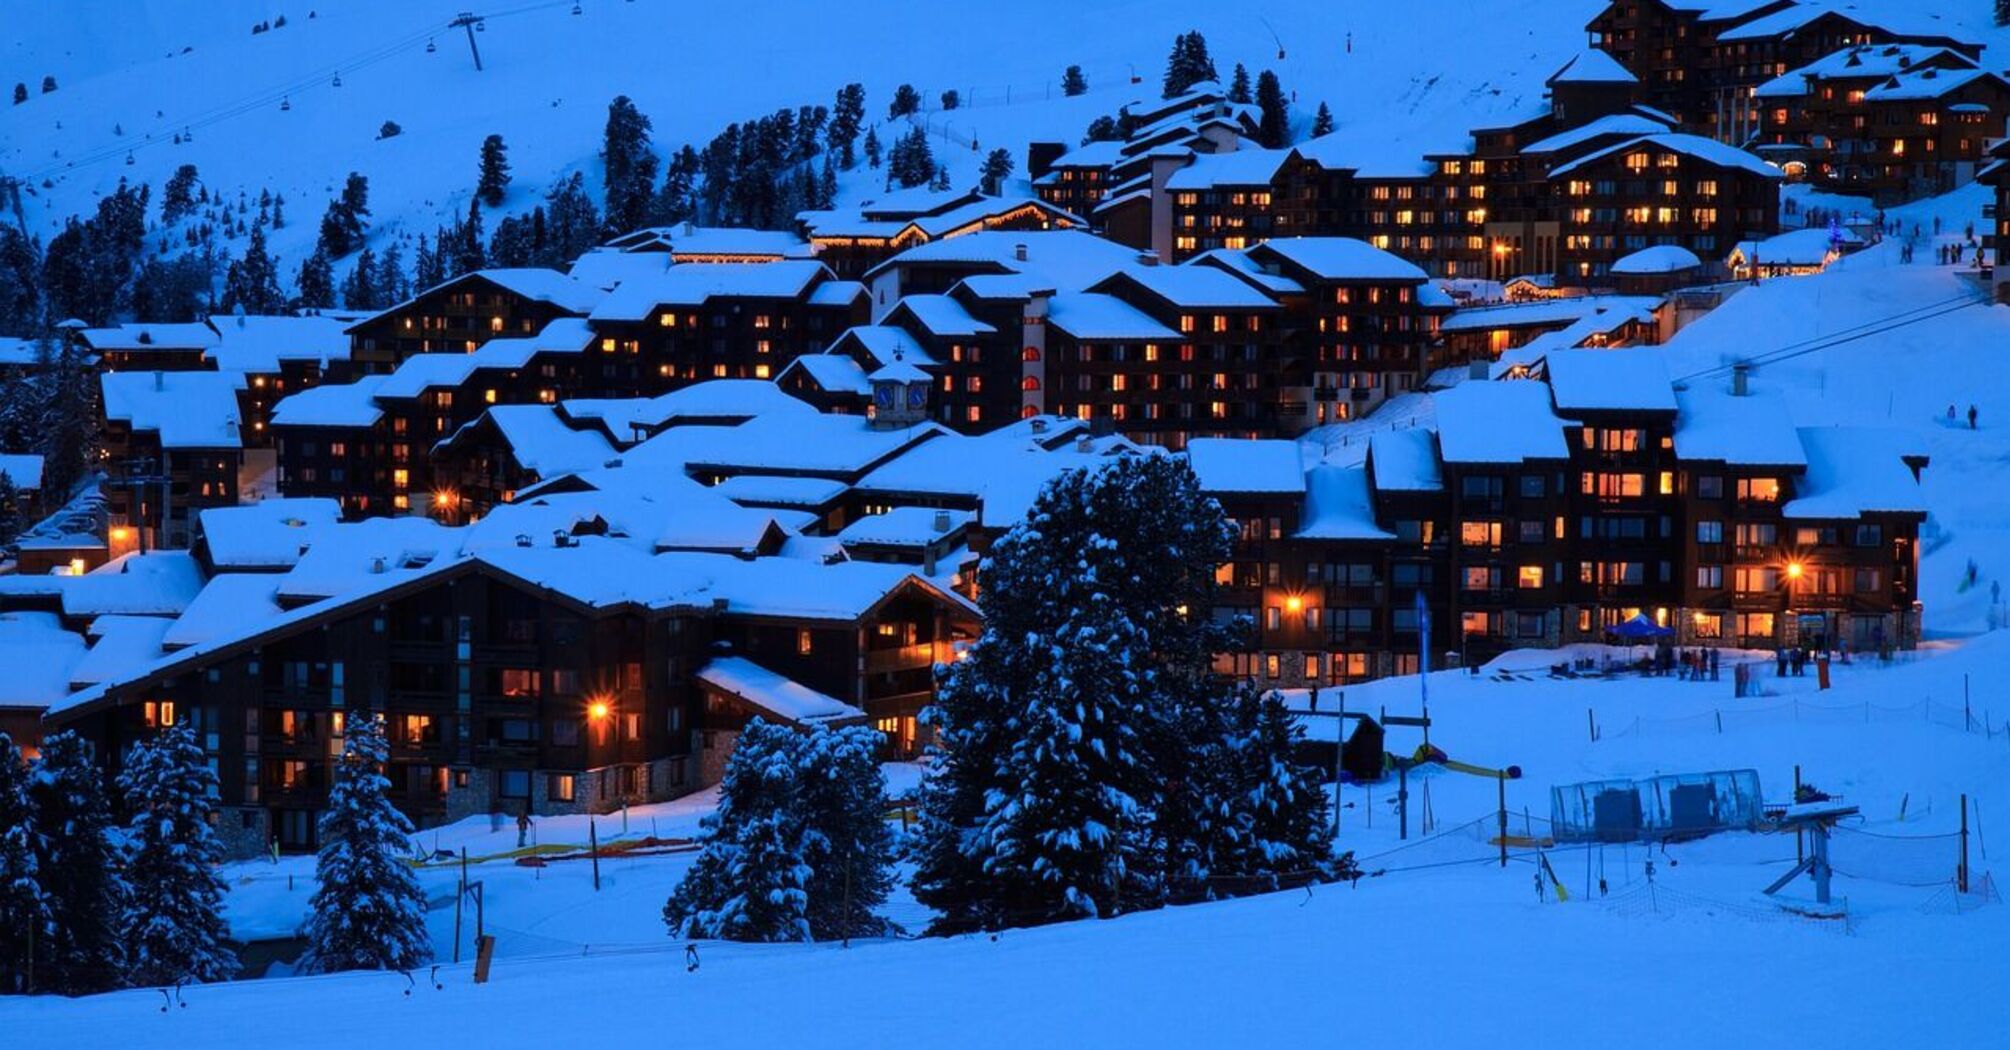 World ski resorts: top 8 most popular places for winter vacation